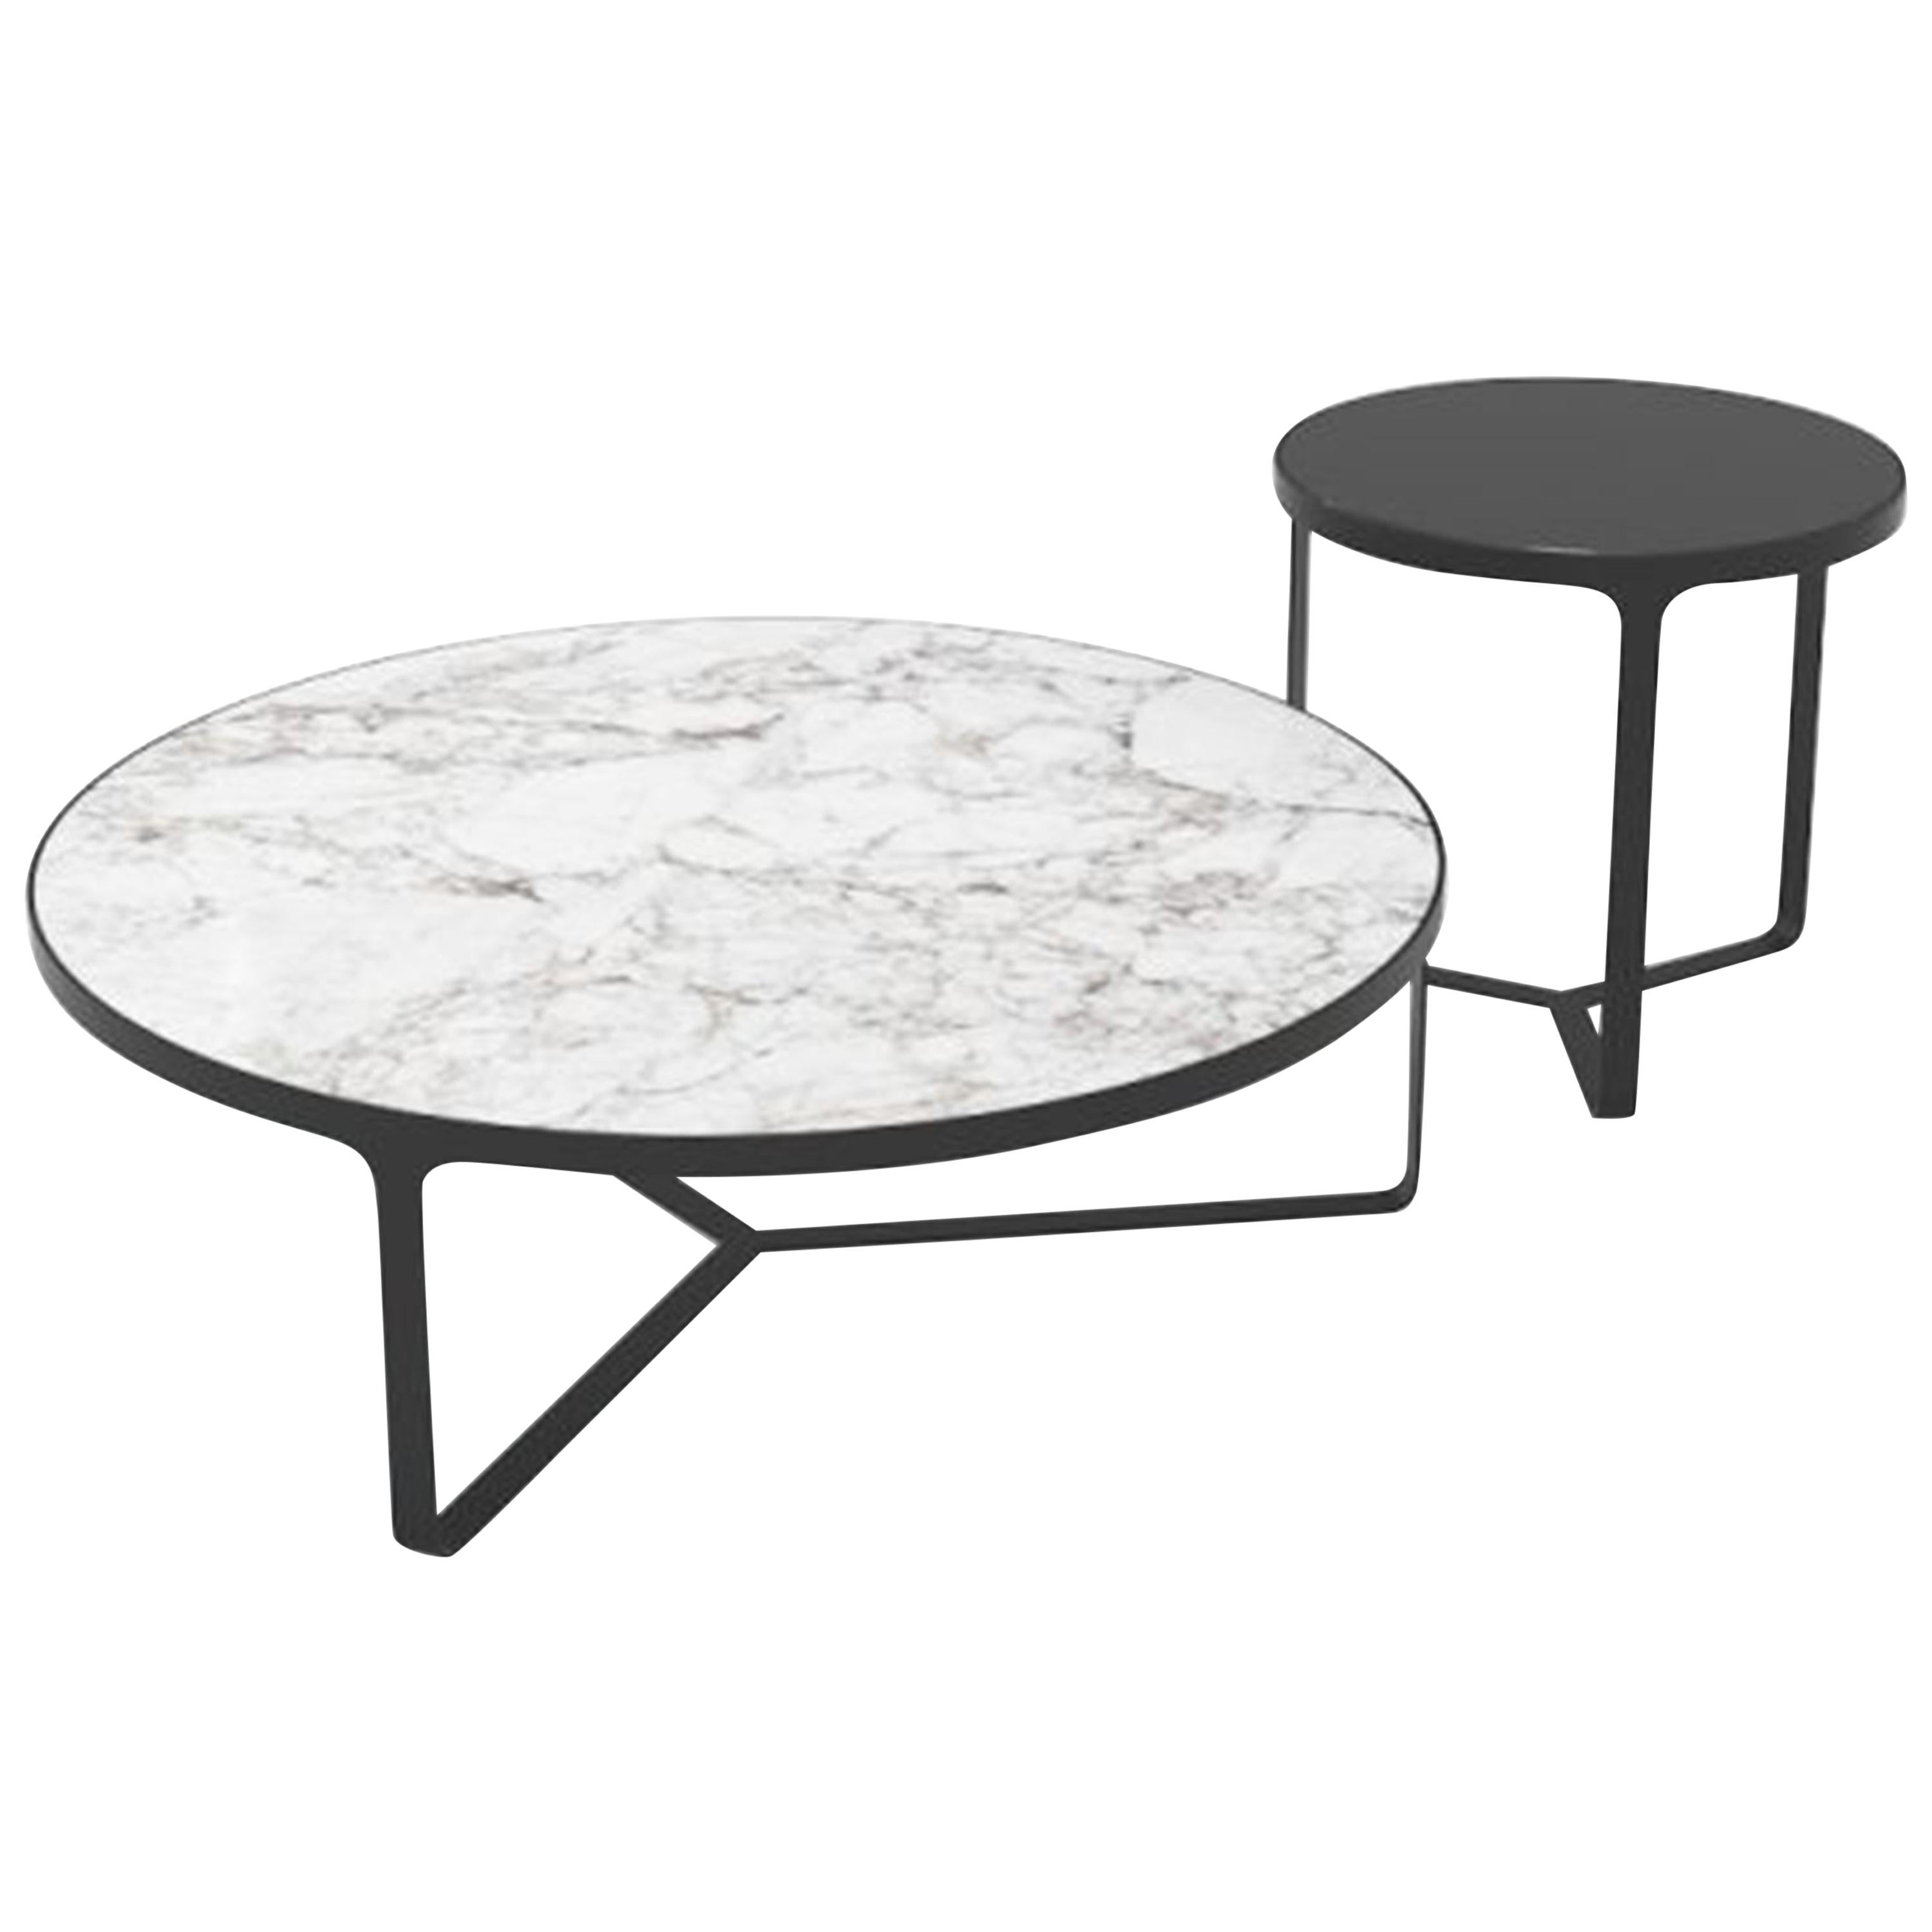 New Tacchini Set of Cage Tables in Marble Designed Gordon Guillaumier